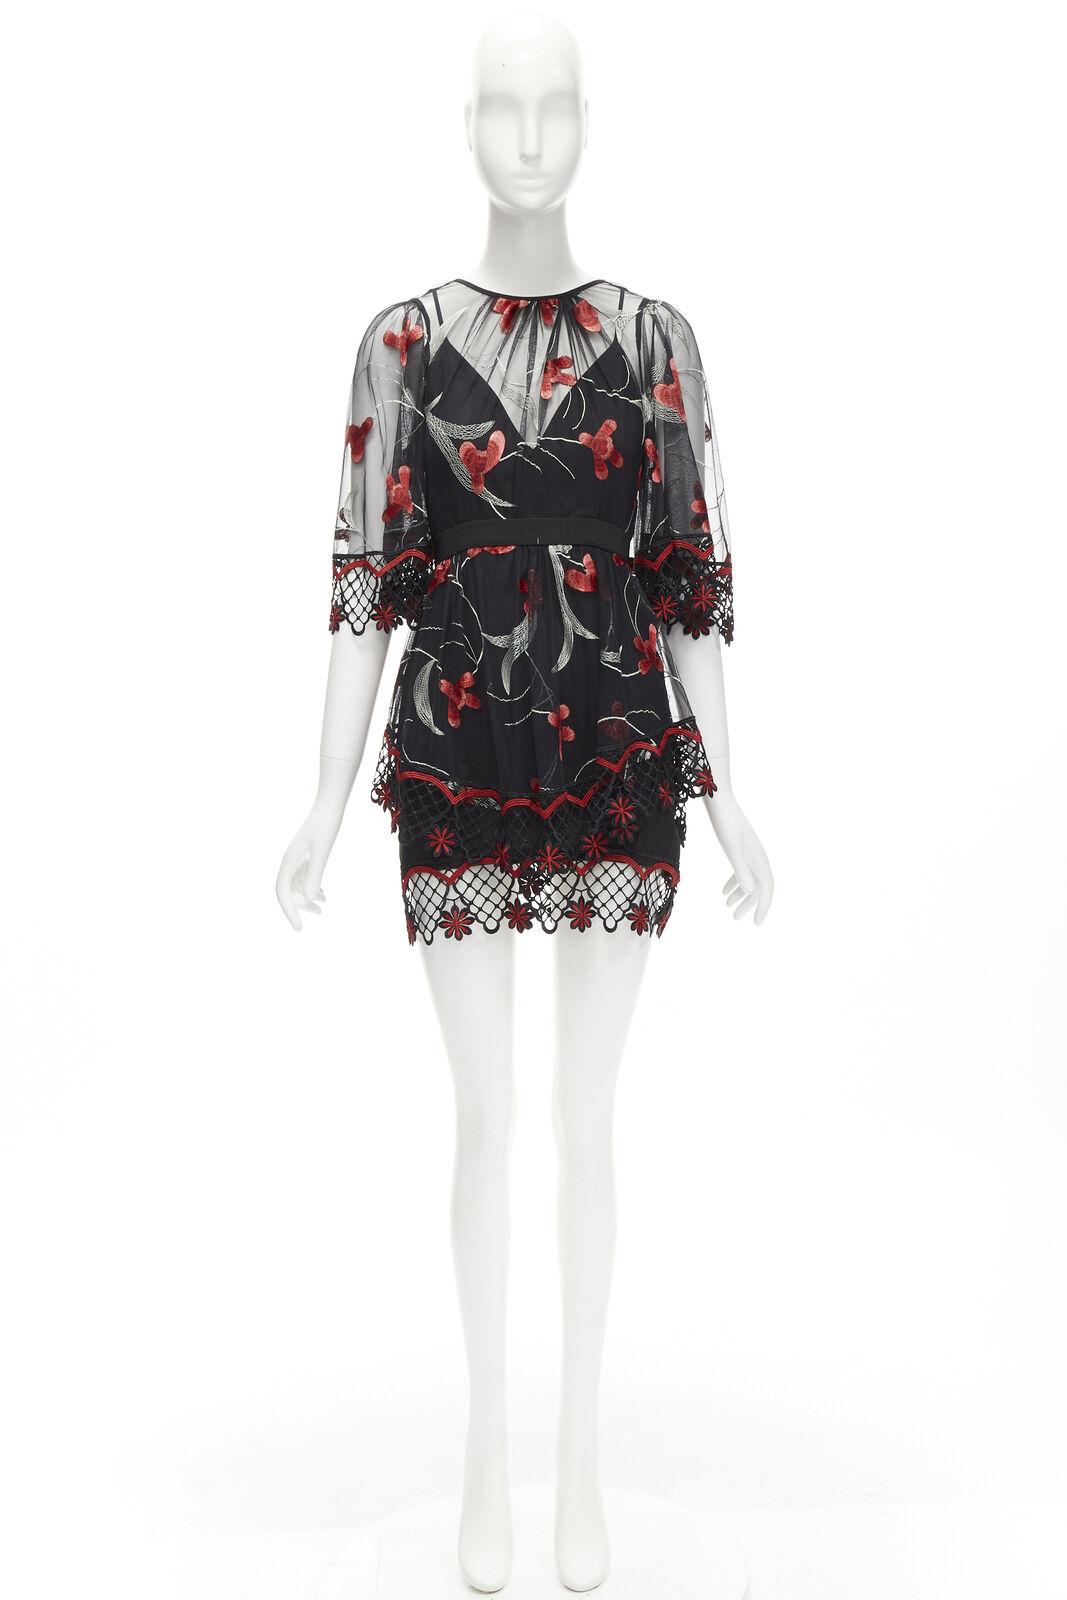 ALICE MCCALL Wish you Were Here black red guipere lace floral tulle dress US2 XS For Sale 5